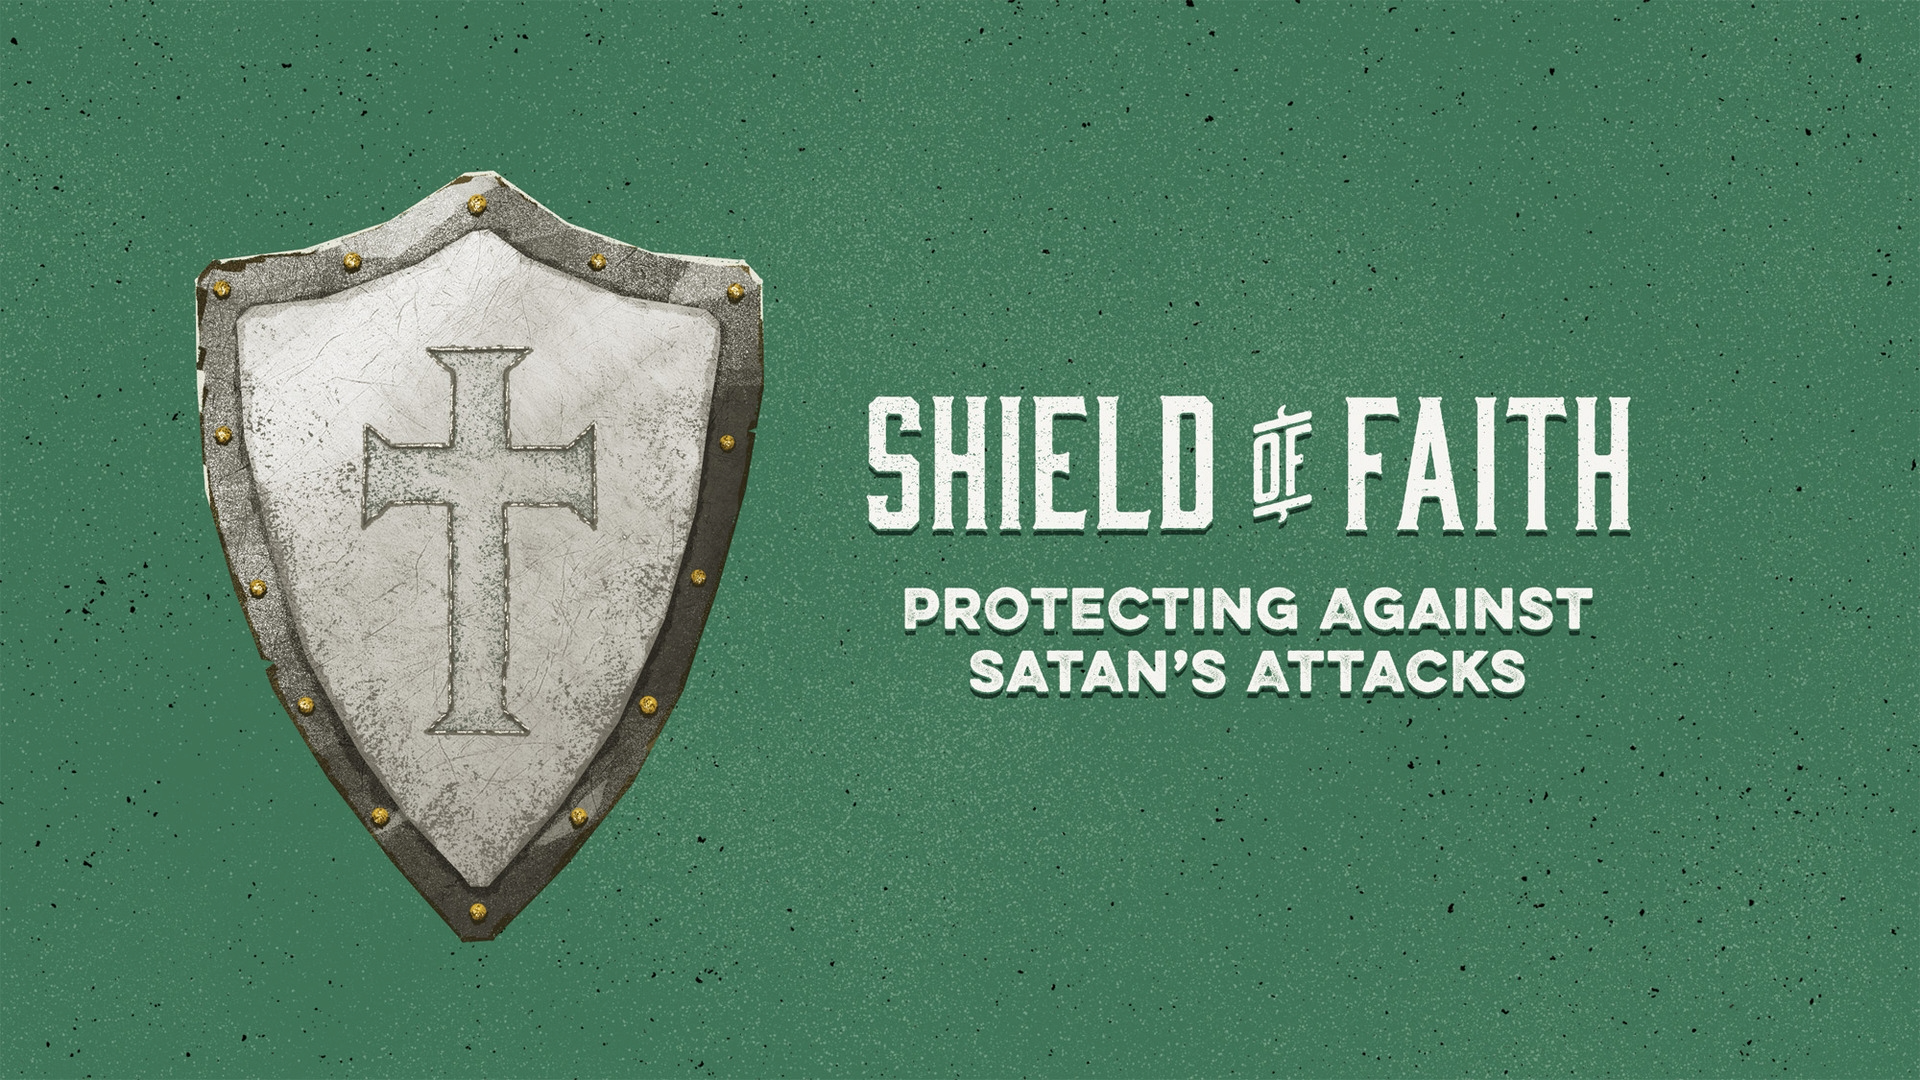 0 - full_armor_of_god_shield_of_faith-title-1-Wide 16x9.png